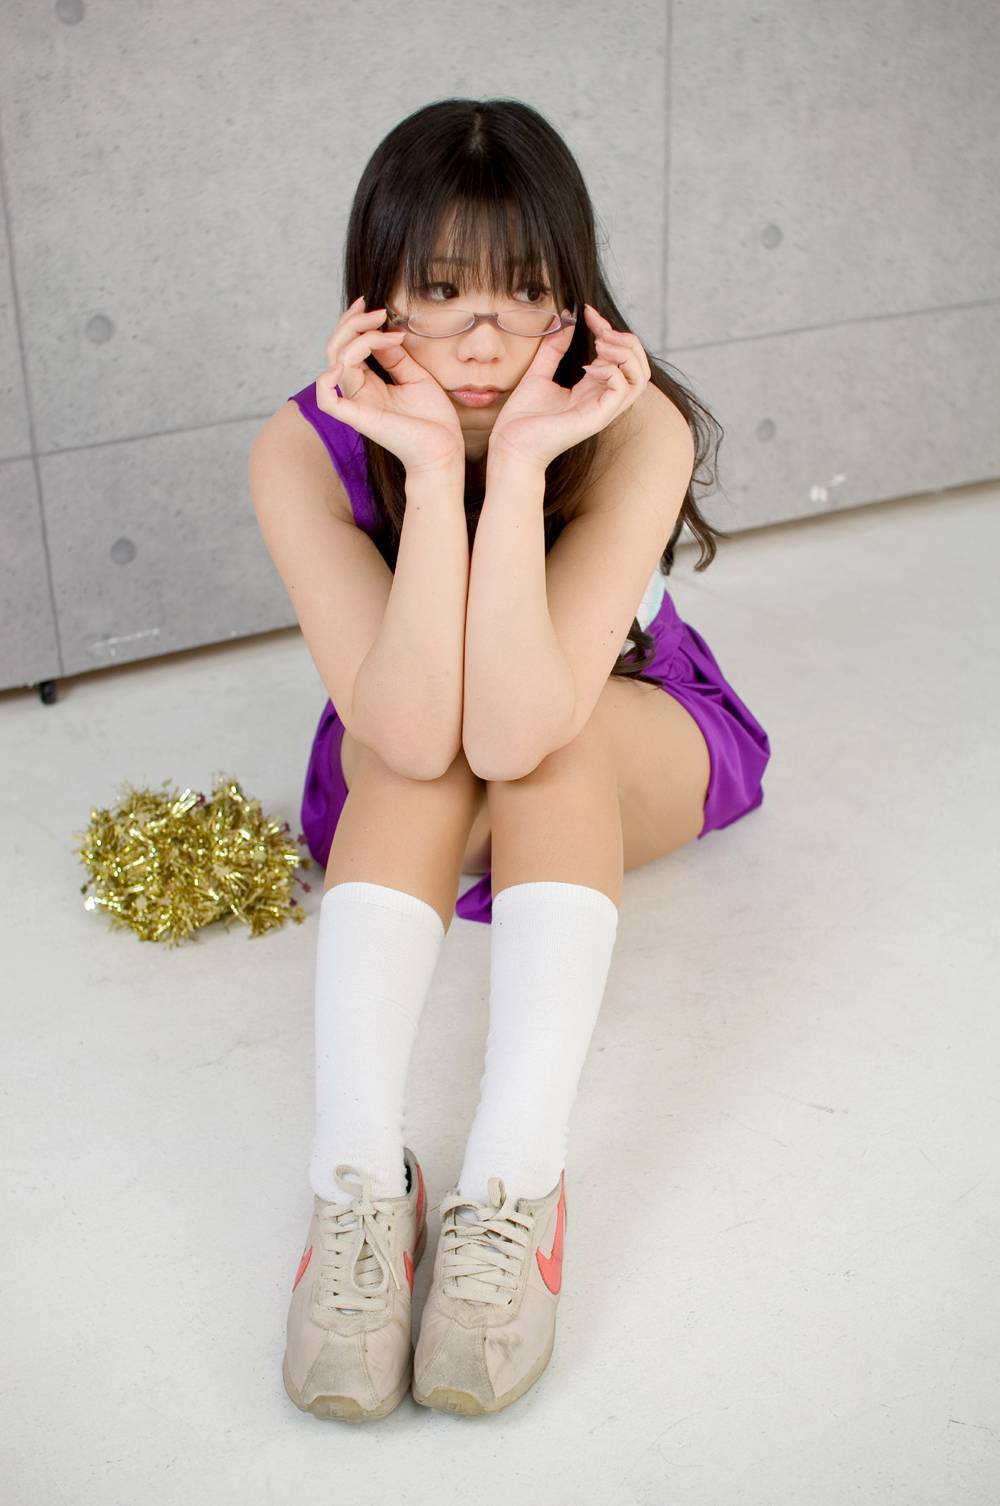 [Cosplay] Lucky Star - Hot Cosplayer